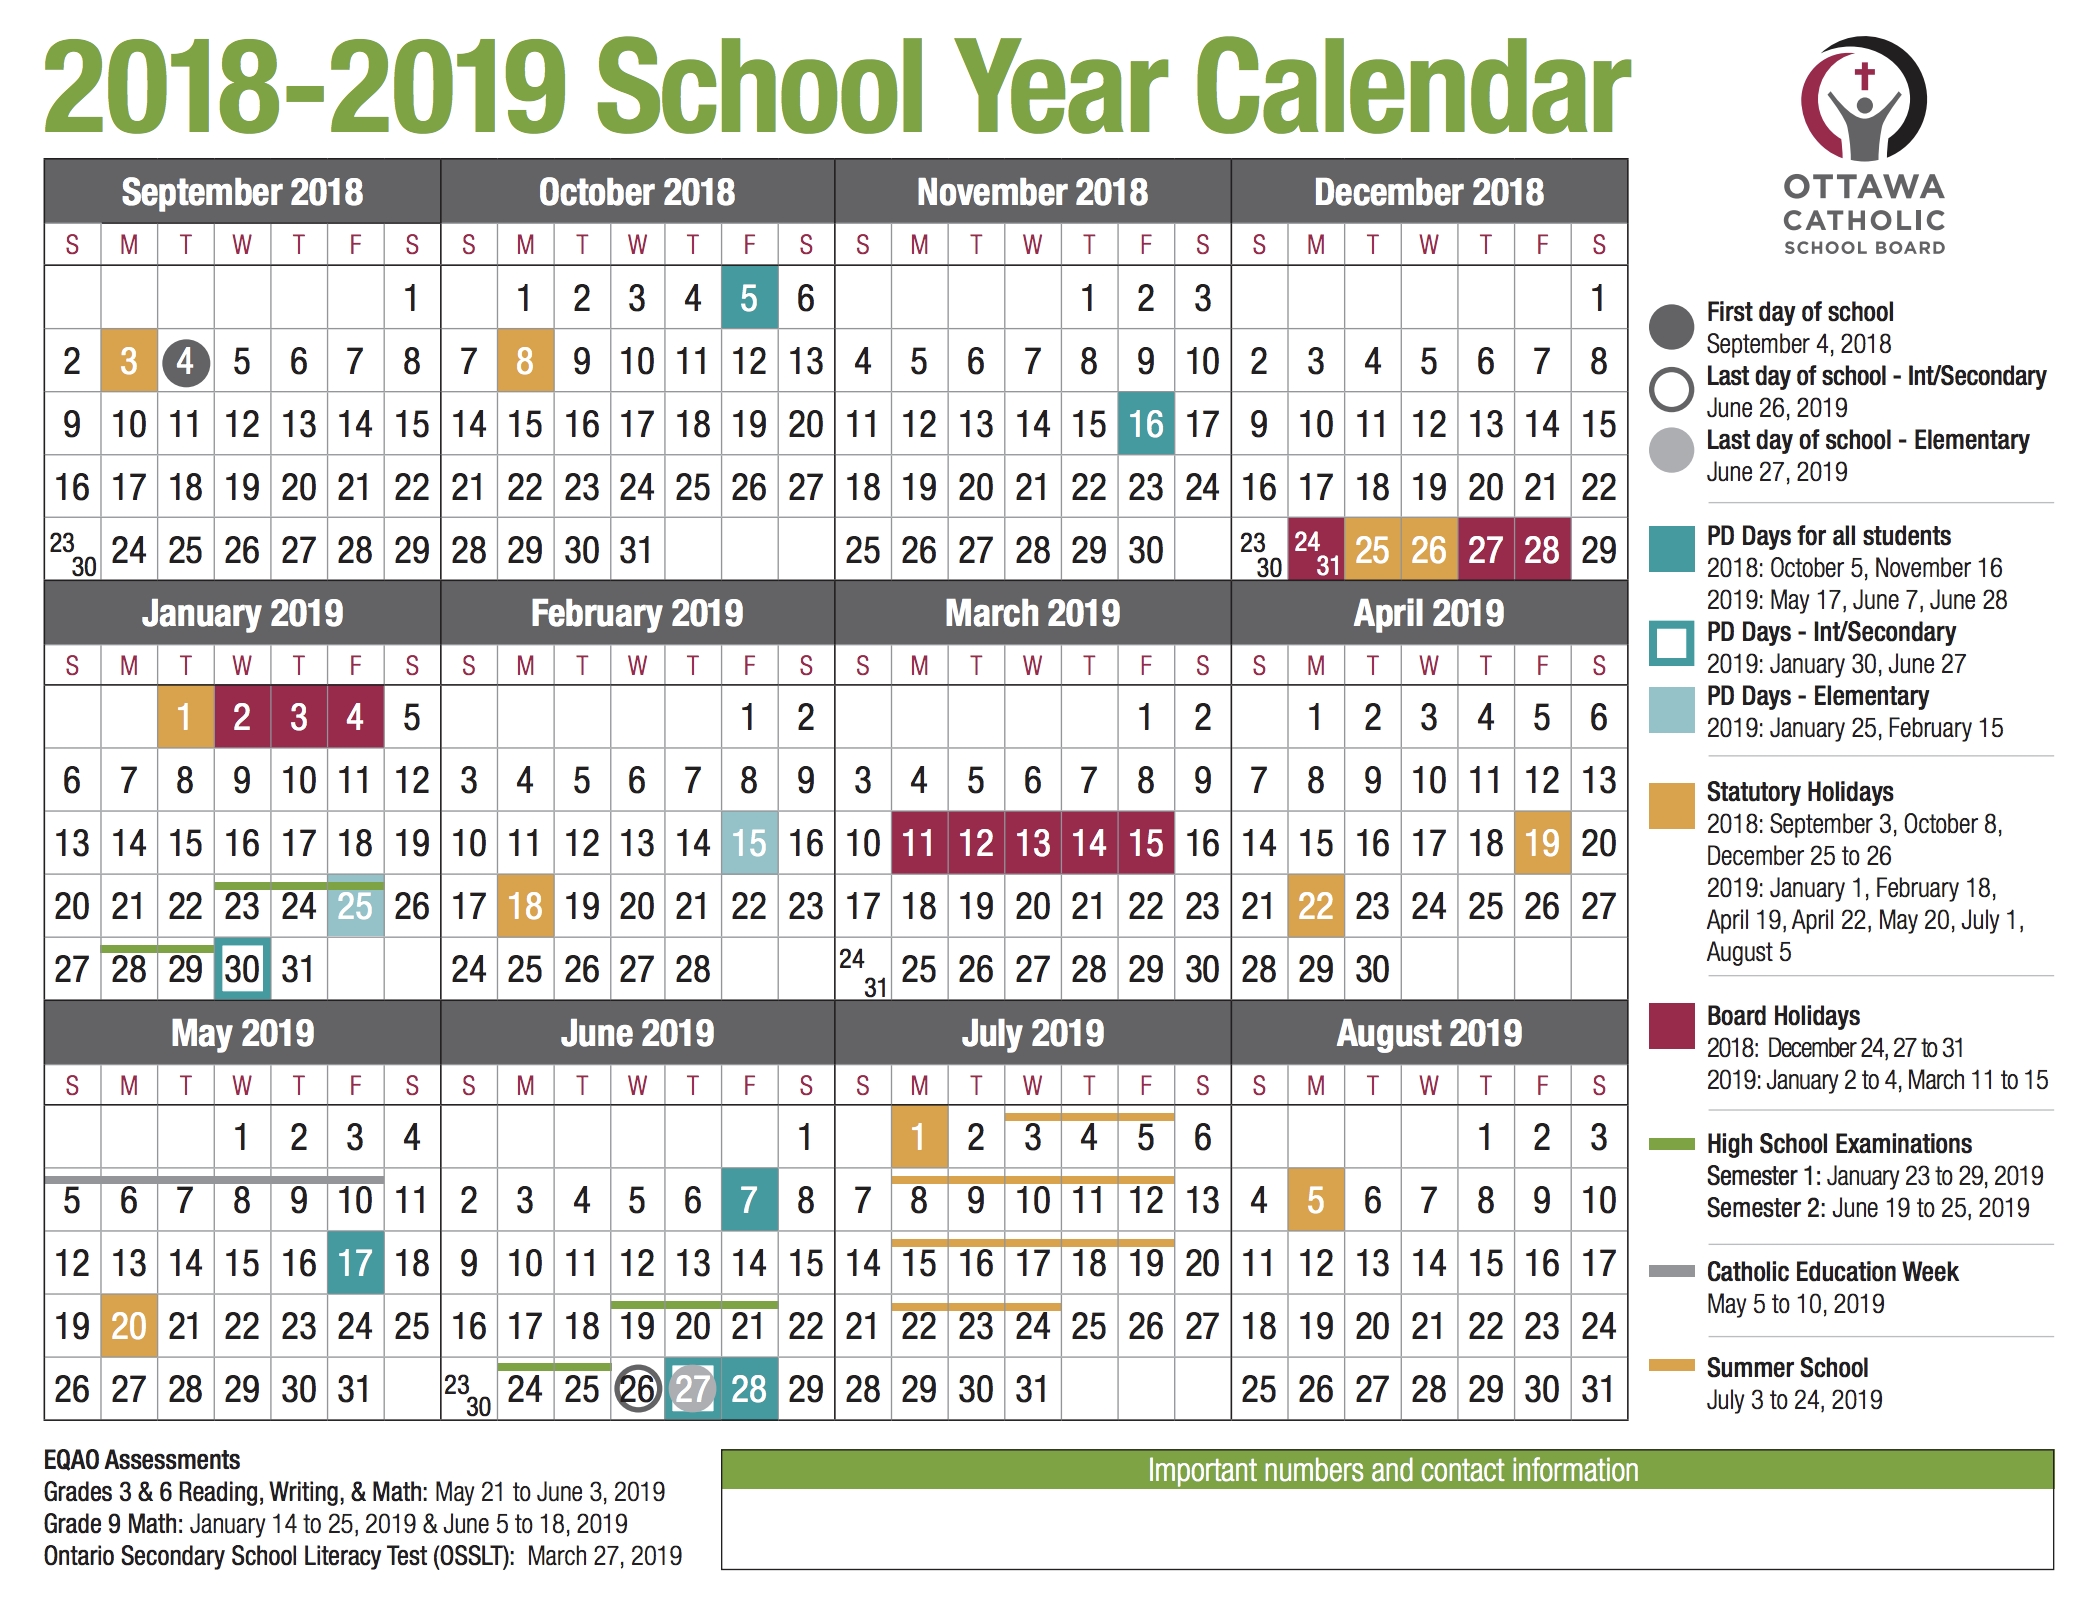 Ocsb-School-Year-Calendar-Image-2018-2019 - Ocsb throughout Special Days Calendat 2019 For Schools